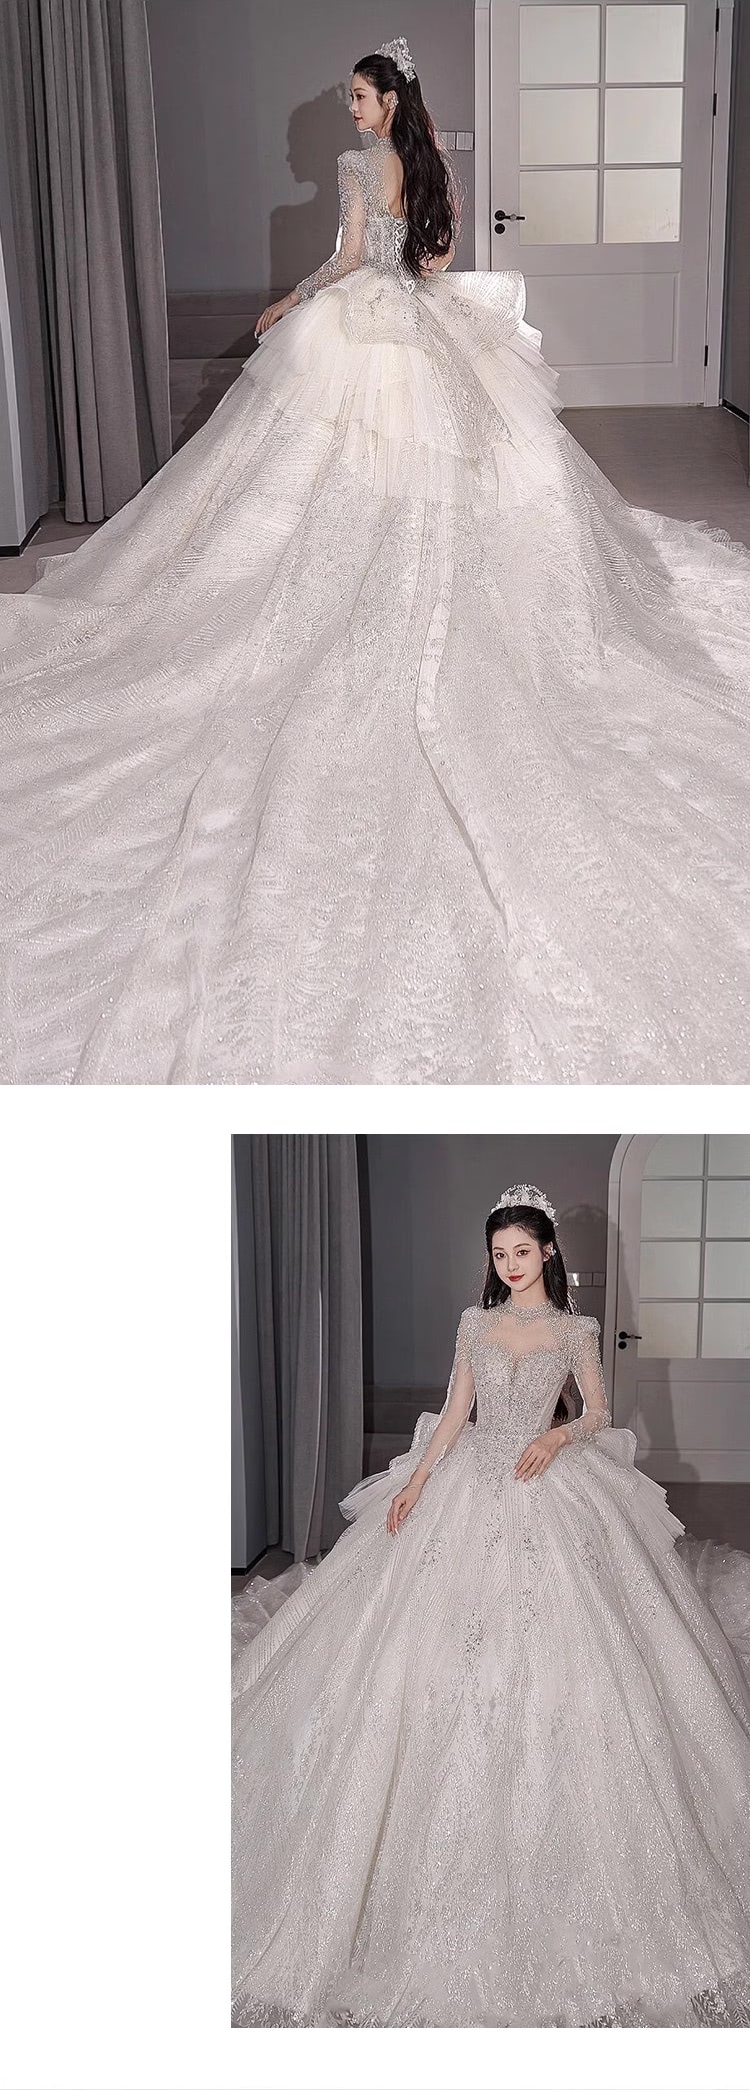 Grand-A-line-Tulle-Long-Sleeve-Tailing-Bride-Wedding-Dress-Party-Gown11